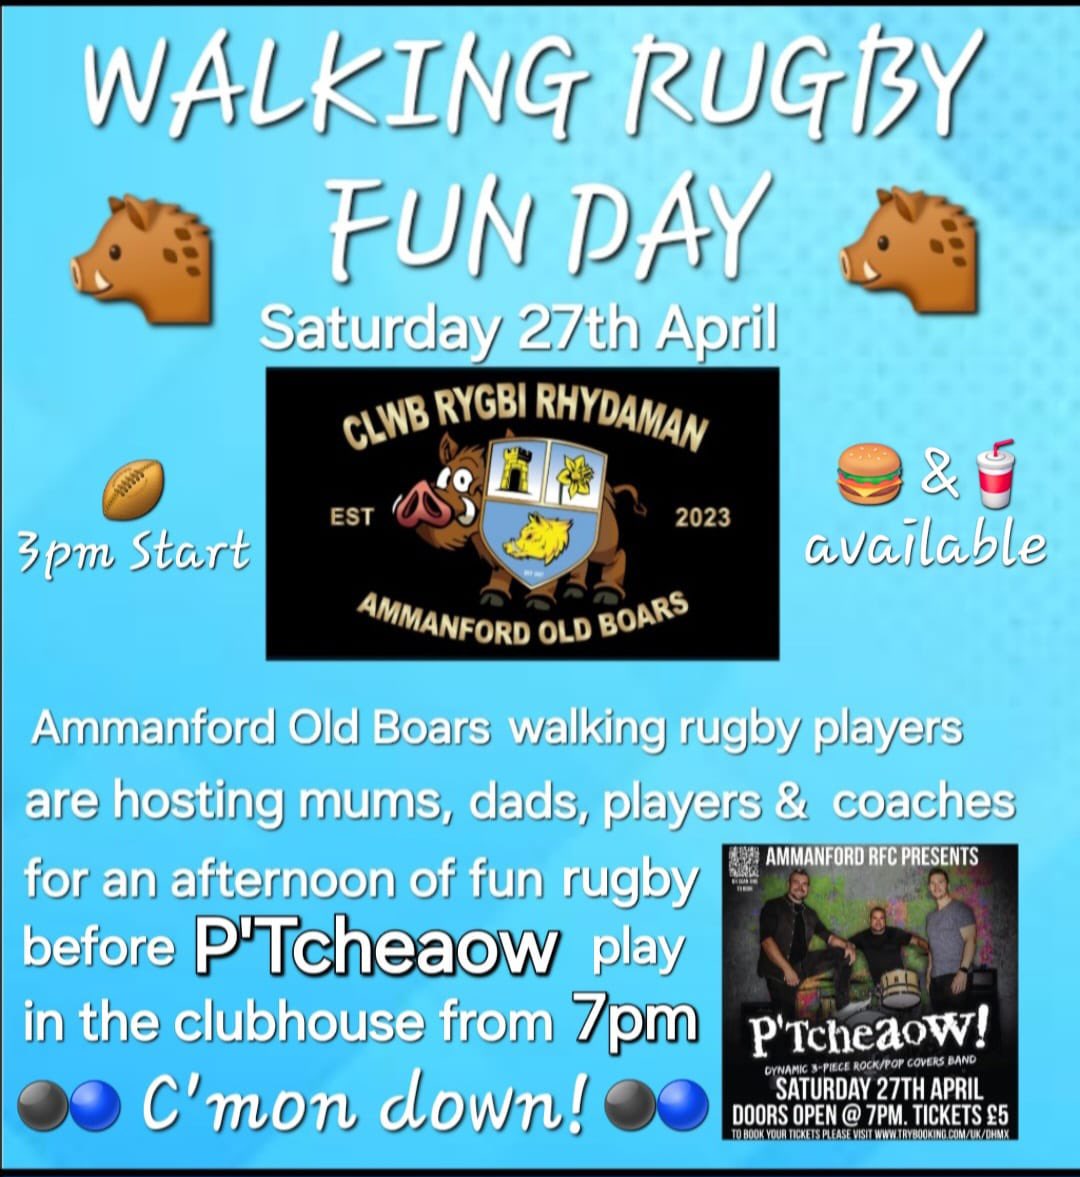 After a winter of playing in the mud under lights, our Old Boars Walking Rugby players were back out in daylight! Getting ready for our Fun Day of Walking Rugby on the 27th April at the Rec! 🐗🔵⚫️🏉